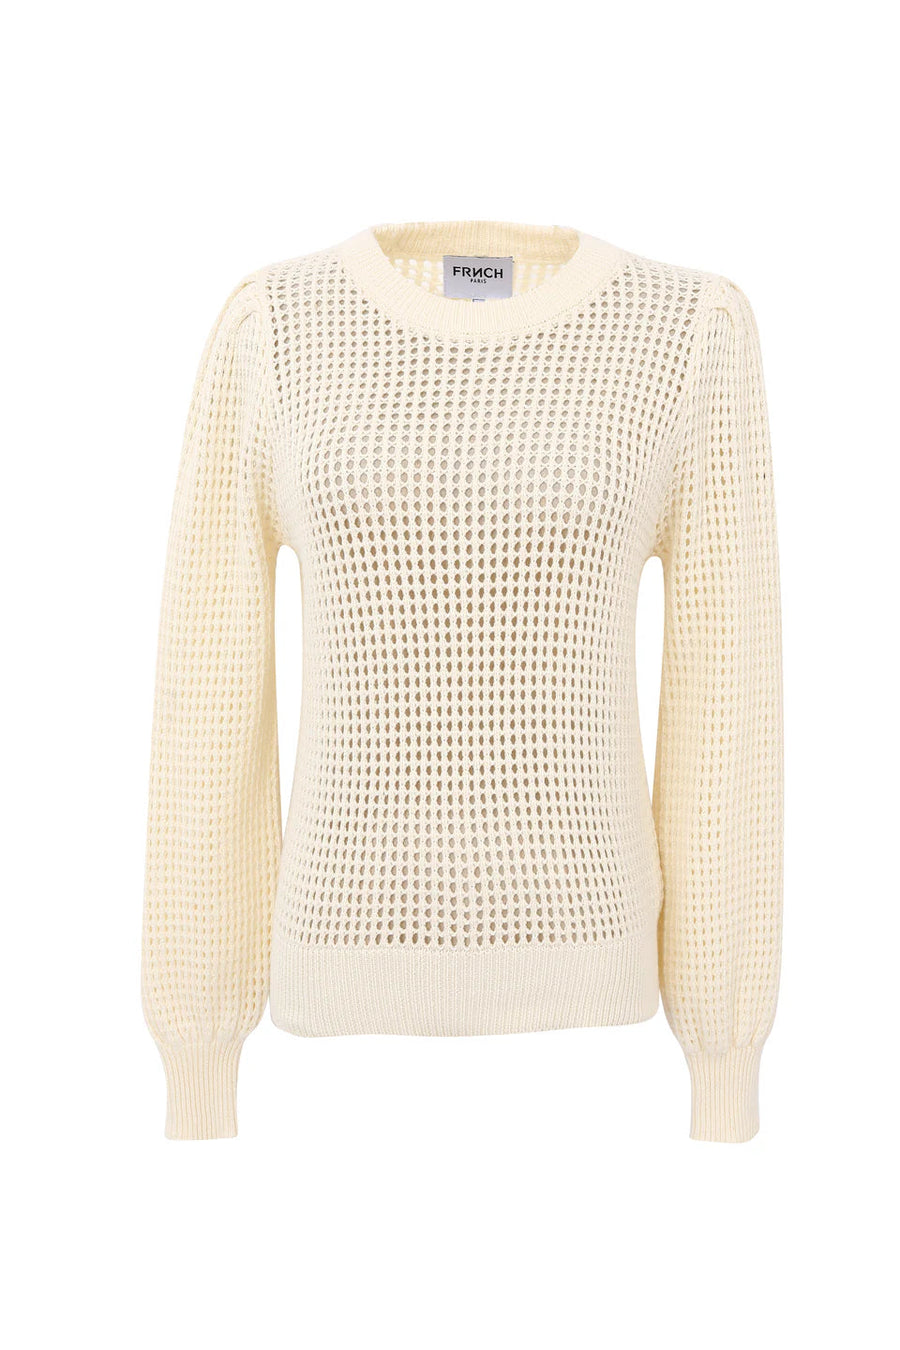 Yona Knit Sweater top FRNCH 